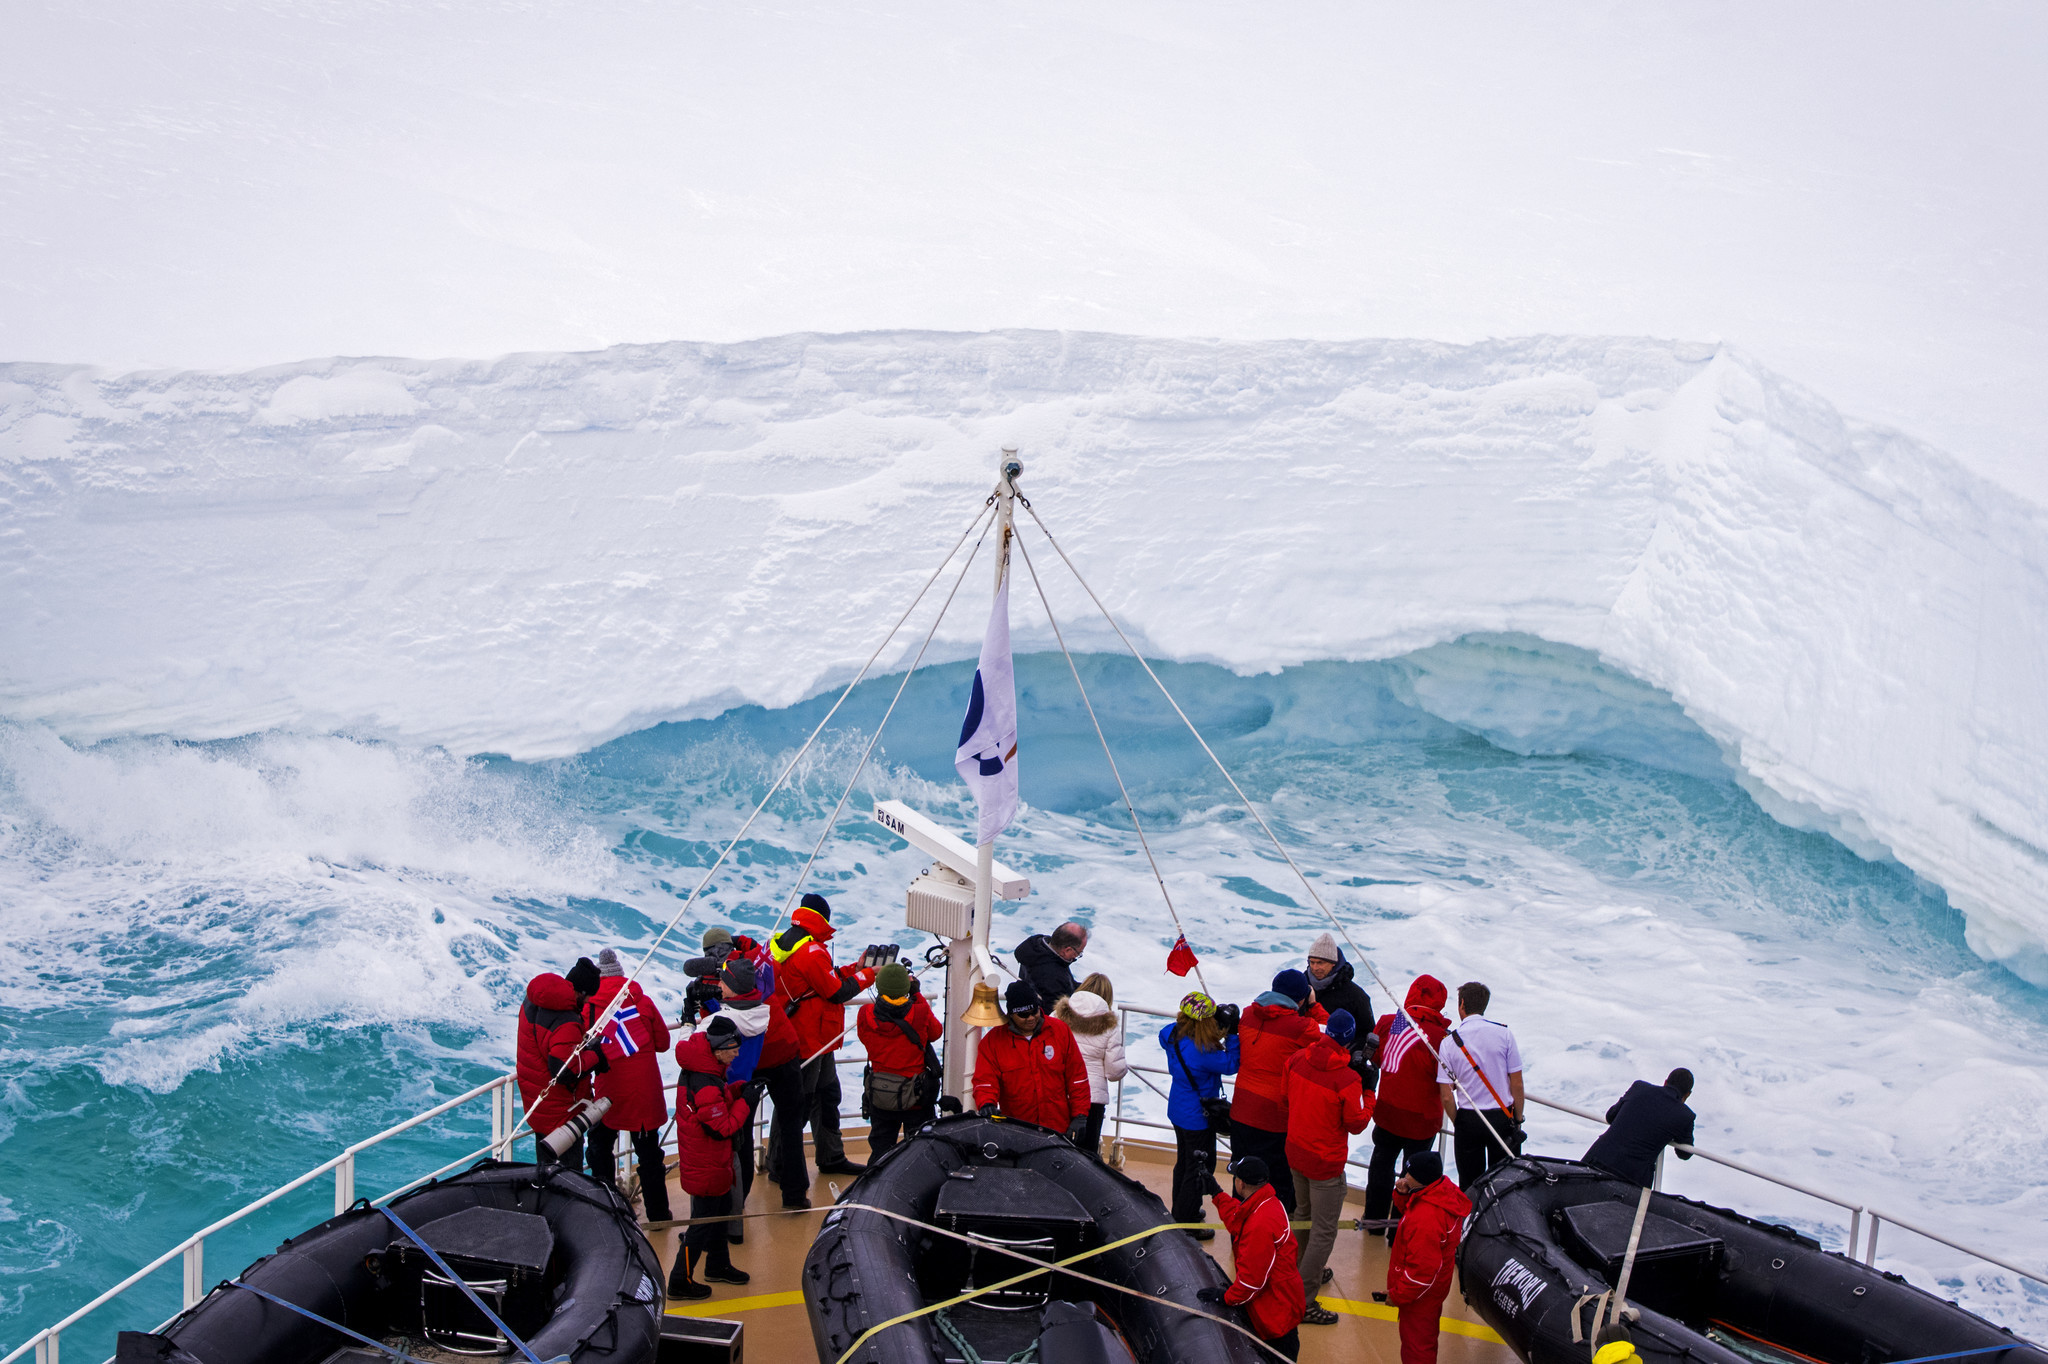 The World came within two meters of the Ross Ice Shelf.